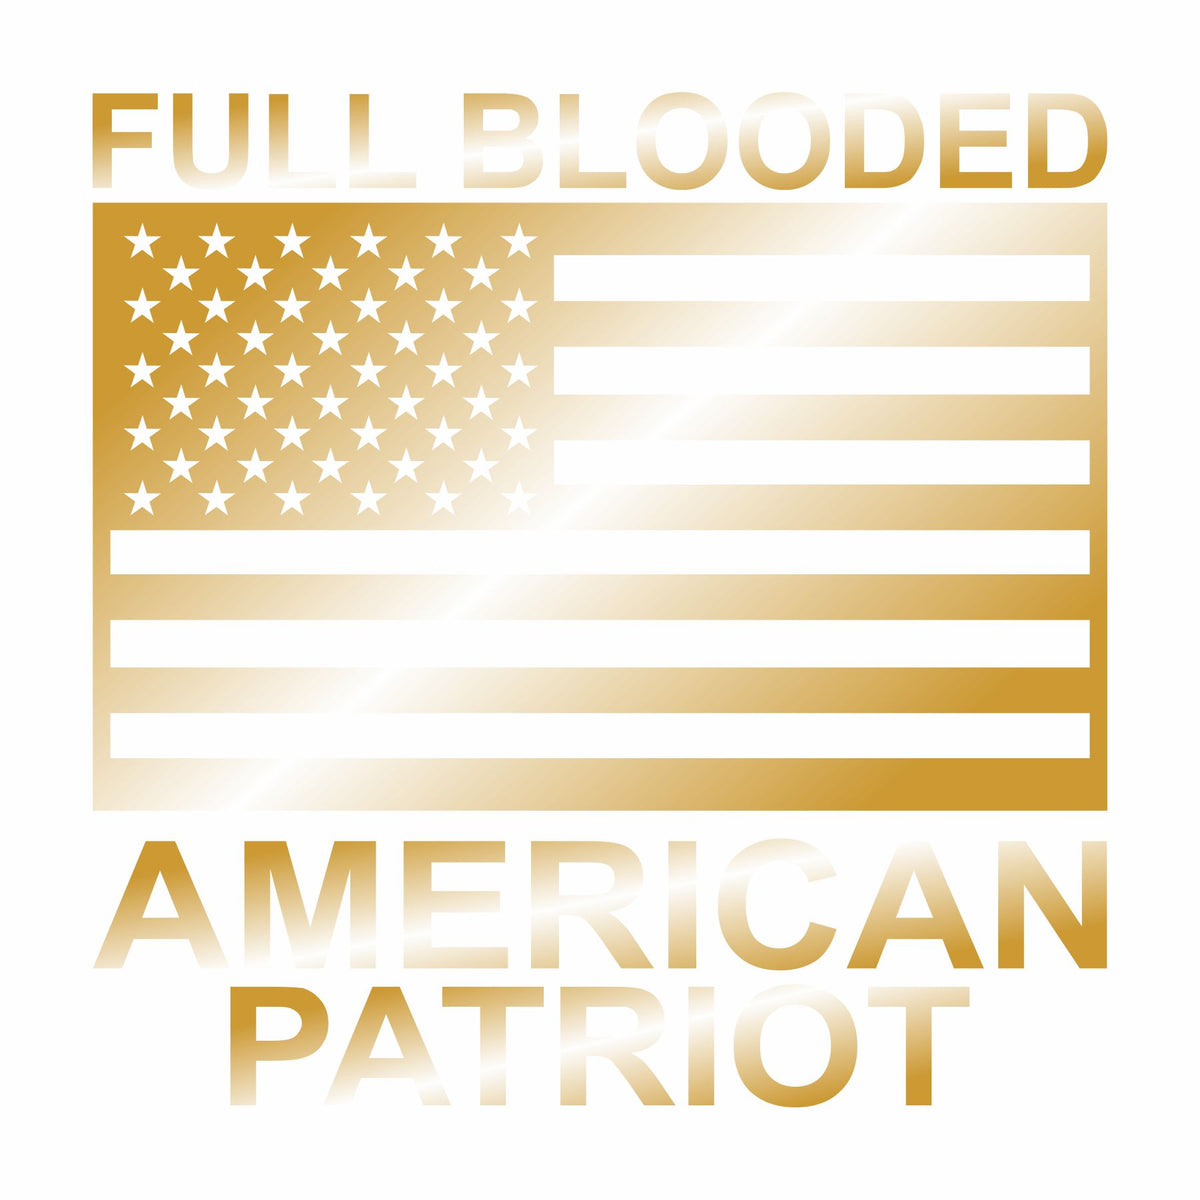 Full Blooded American Patriot - Vinyl Decal - Free Shipping